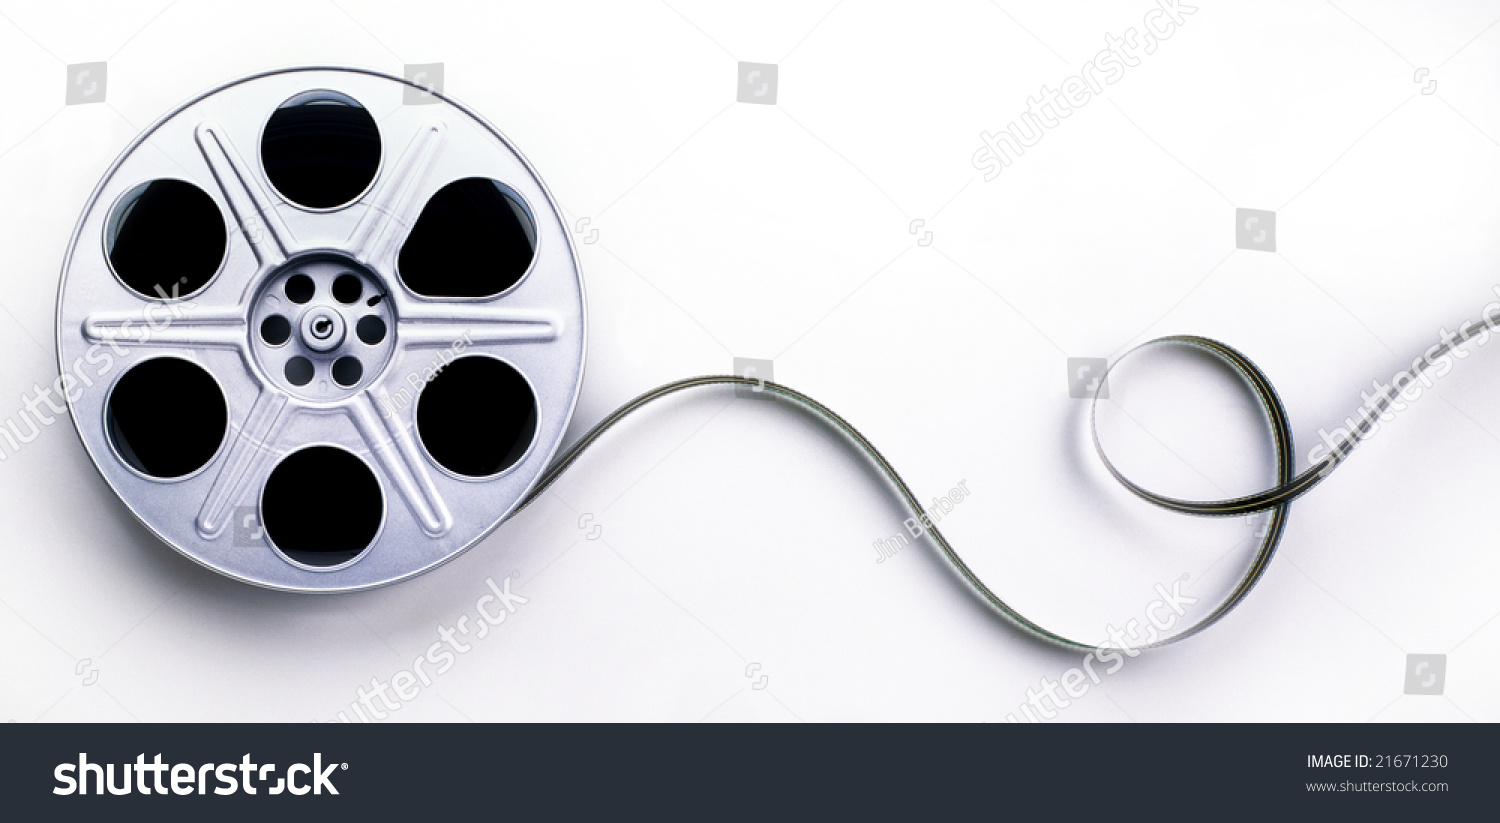 A reel of 35mm motion picture film on a white background #21671230